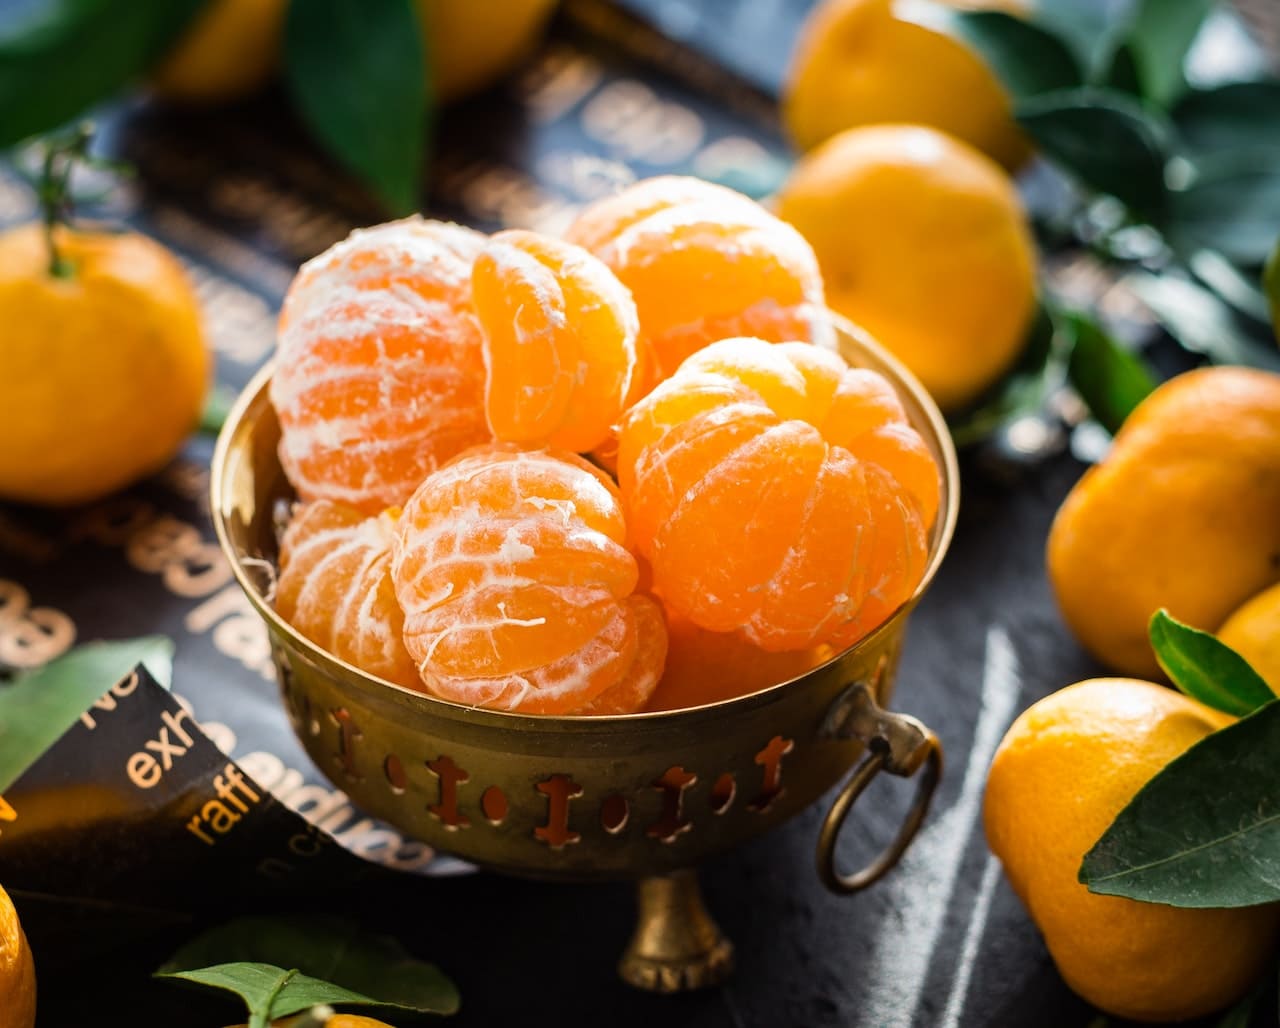 Citrus fruits are just one example of immune-boosting foods to support your wellbeing